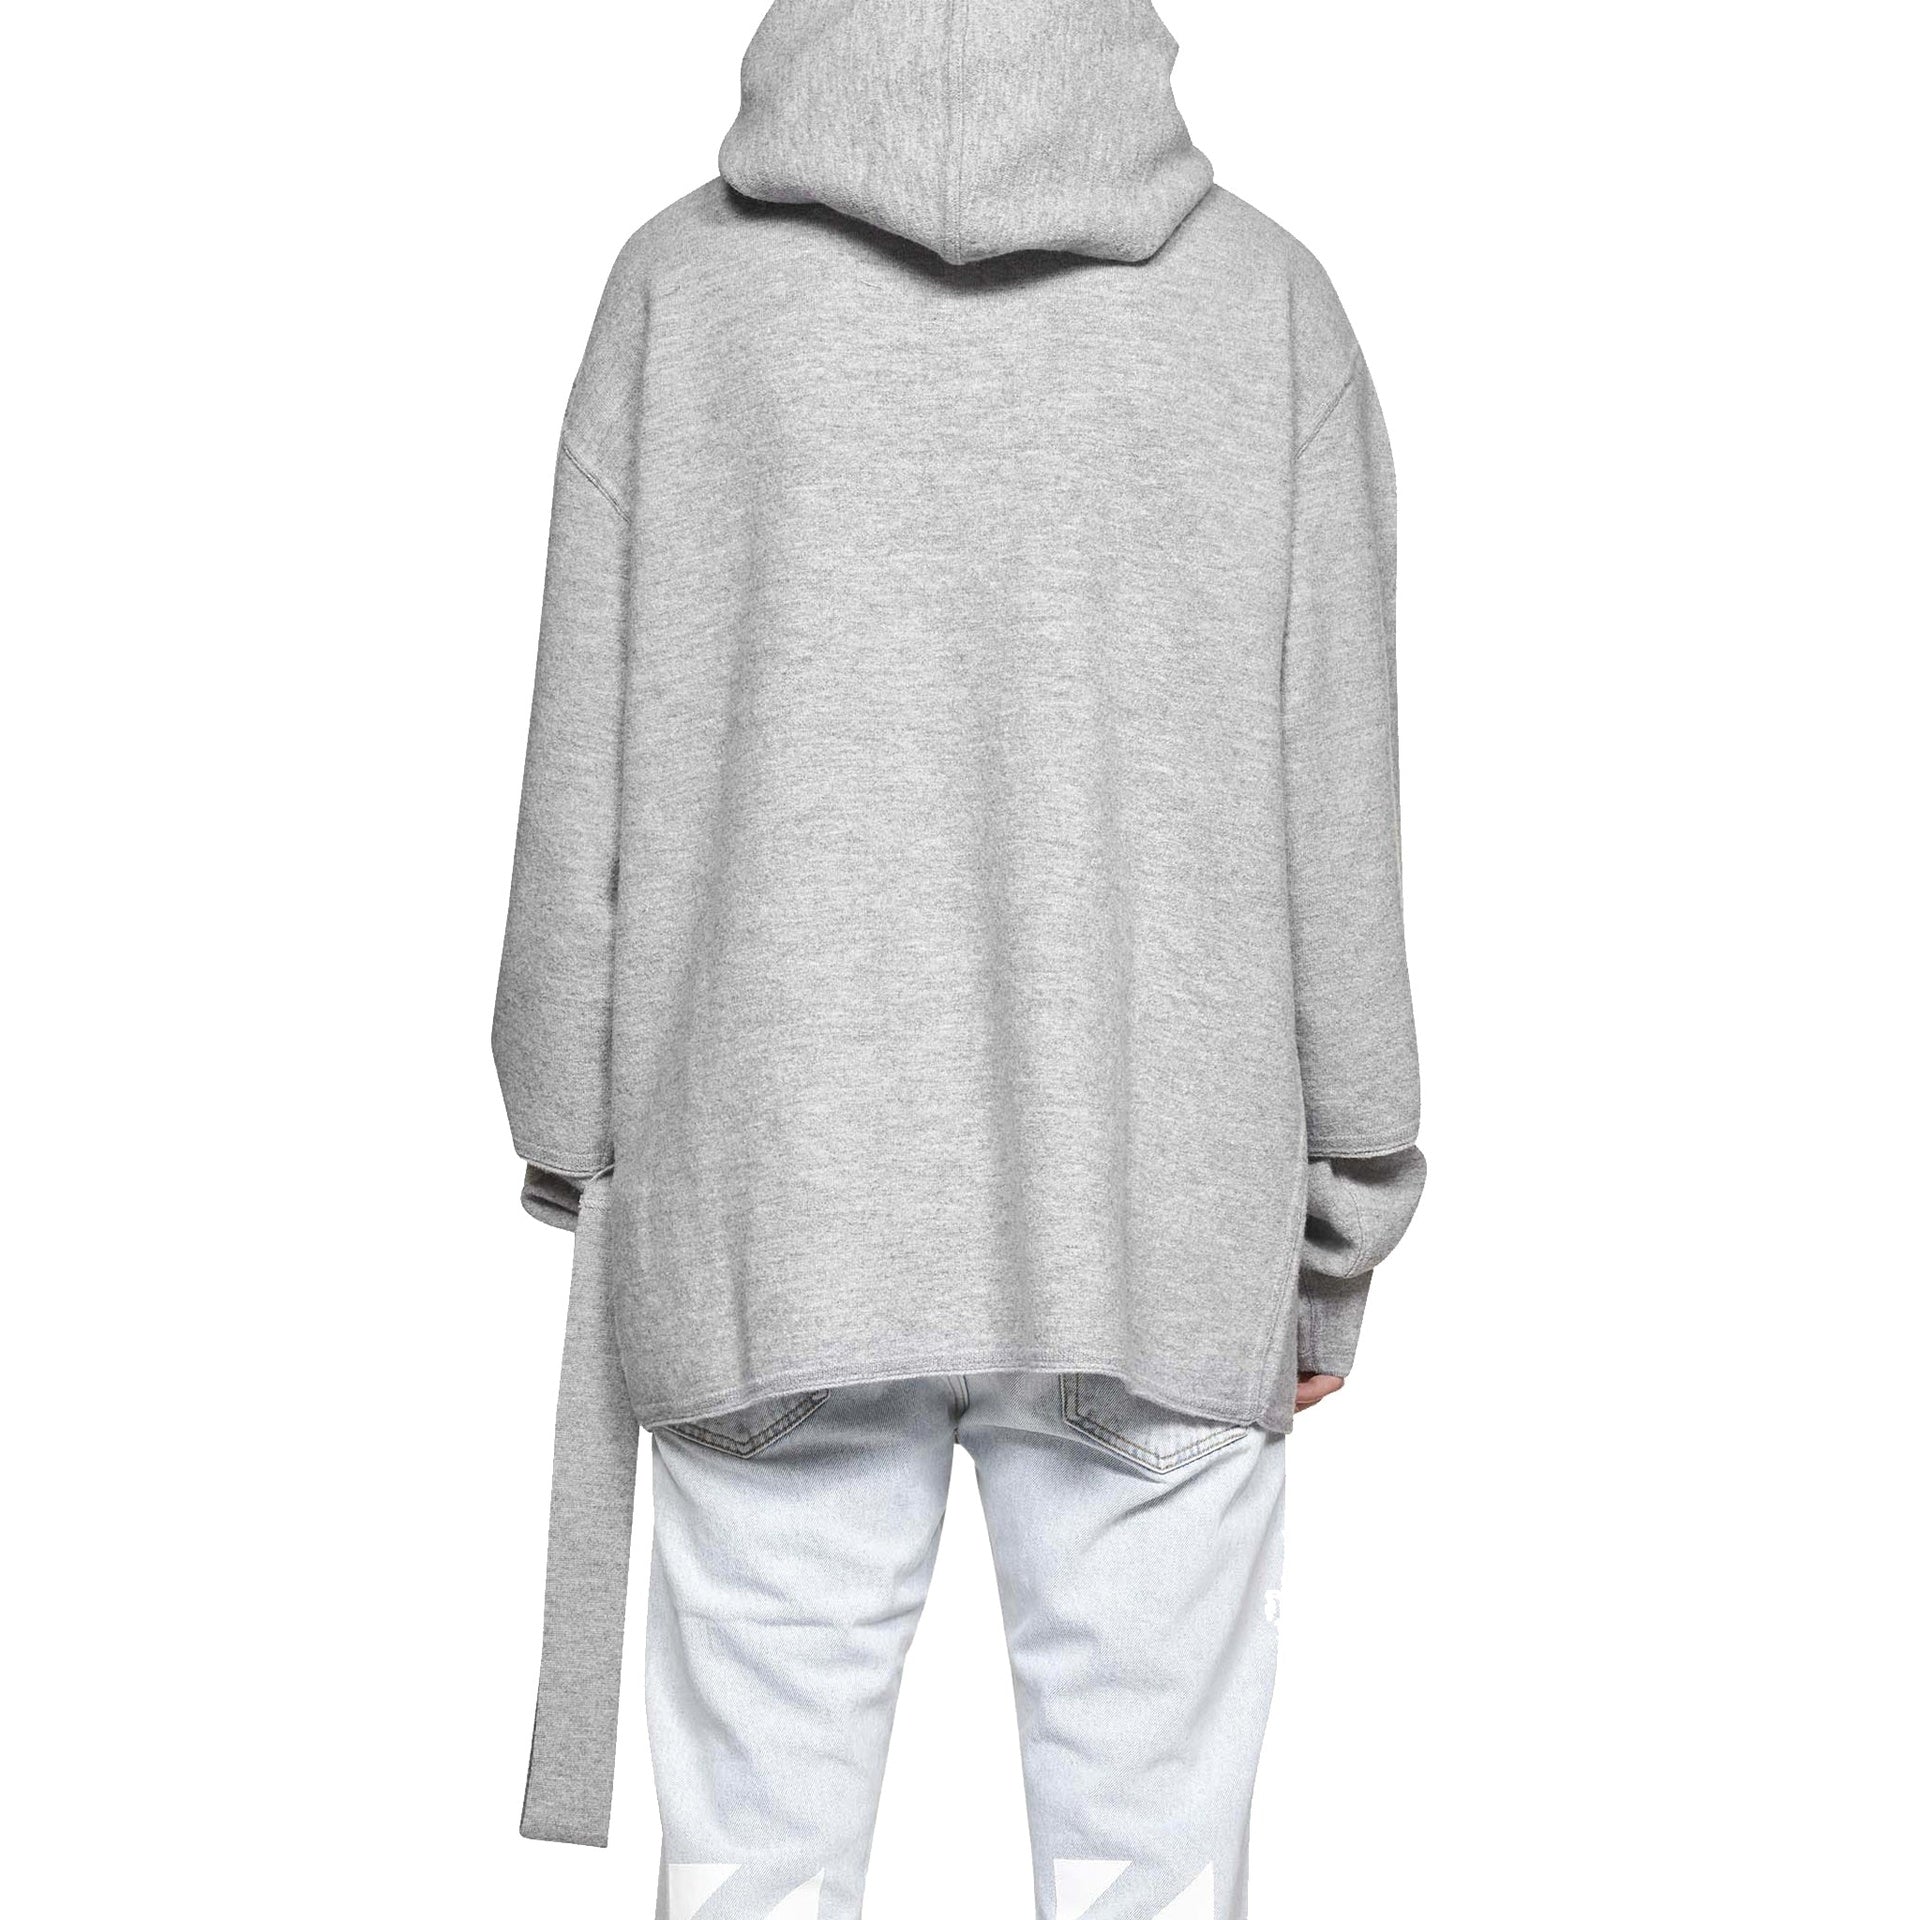 OFF-WHITE-OUTLET-SALE-Off-White-Wool-Sweatshirt-Strick-ARCHIVE-COLLECTION-3.jpg